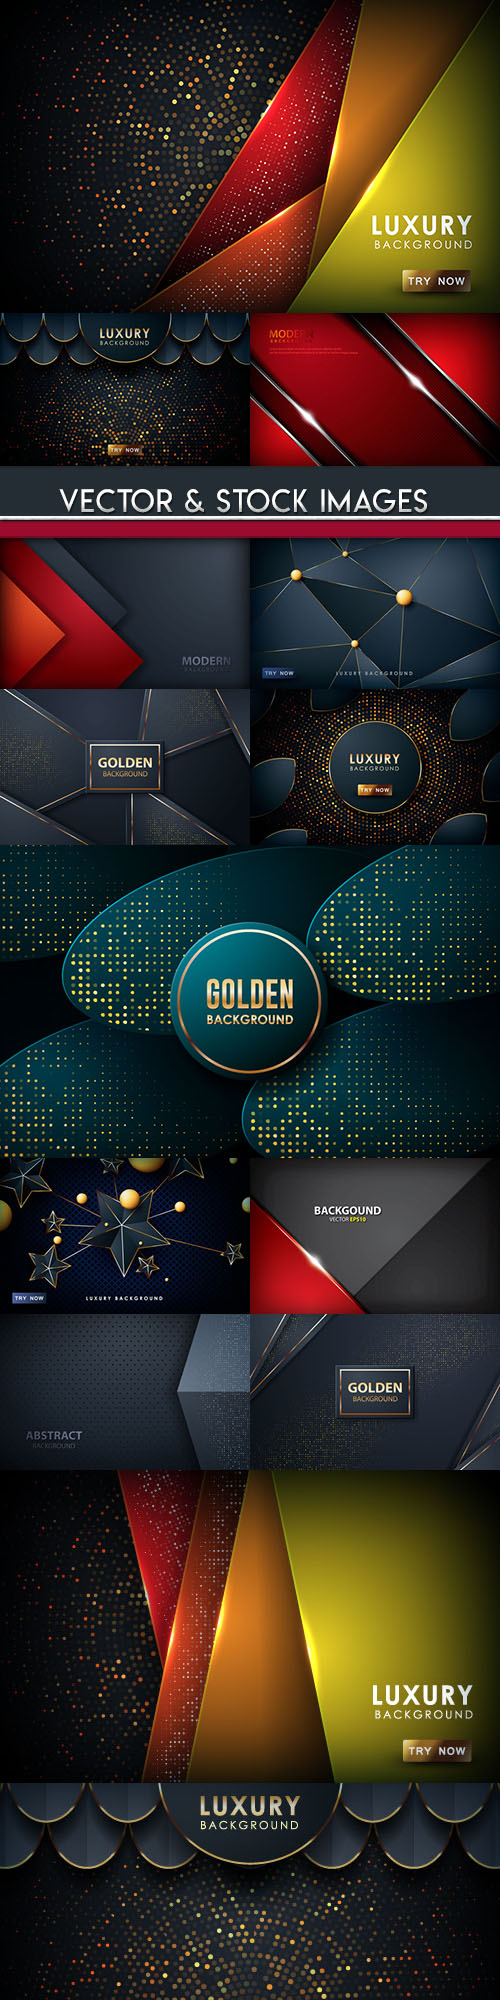 Bright light and gold abstract background collection 2